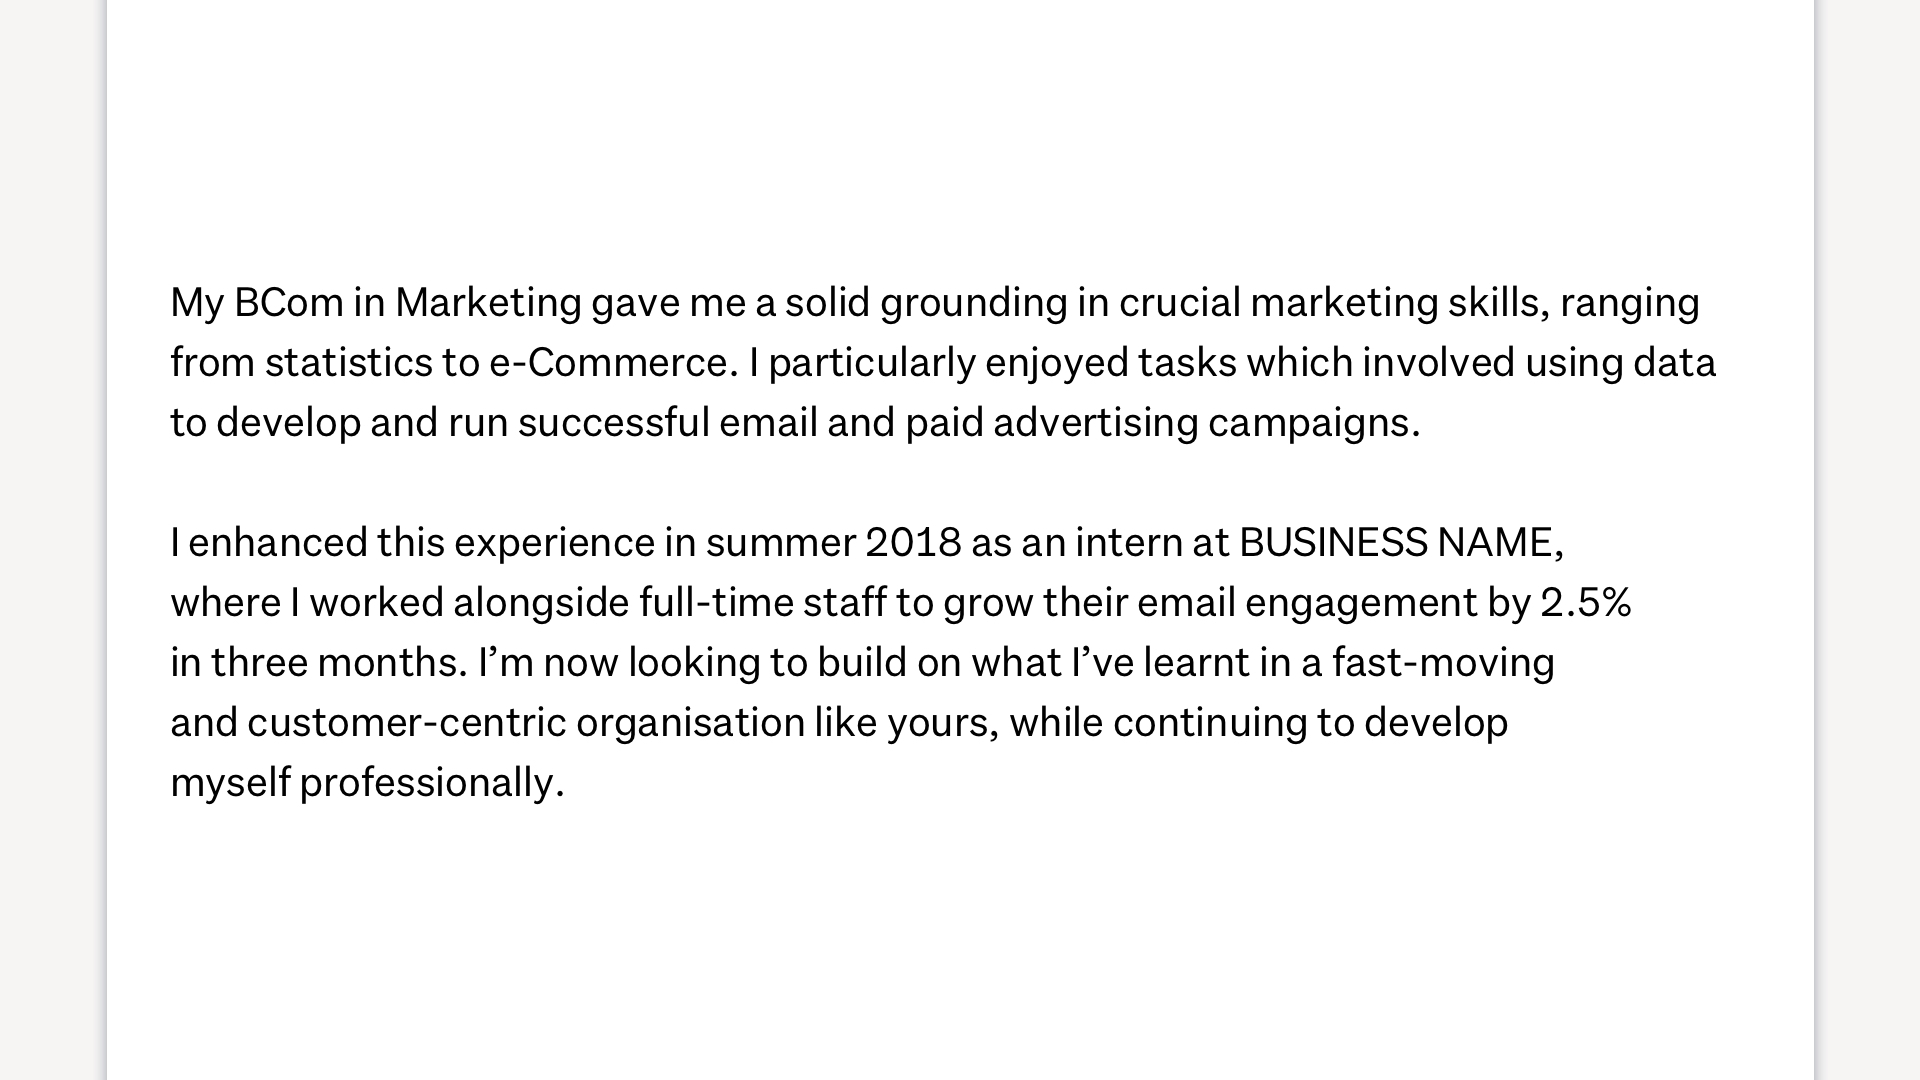 An image showing how to sell yourself in a cover letter. It reads, "My BCom in Marketing gave me a solid grounding in crucial marketing skills, ranging from statistics to e-Commerce. I particularly nejoy tasks whicv involved using data to develop and run successful email and paid advertising campaigns. I enhanced this experience in su,,er 2018 as an intern at BUSINESS NAME, where I worked alongside full-time staff to grow their engagement by 2.5% in three months. I'm now looking to build on what I've learnt in a fast-moving and customer-centric organisation like yours, while continuing to develop myself professionally".